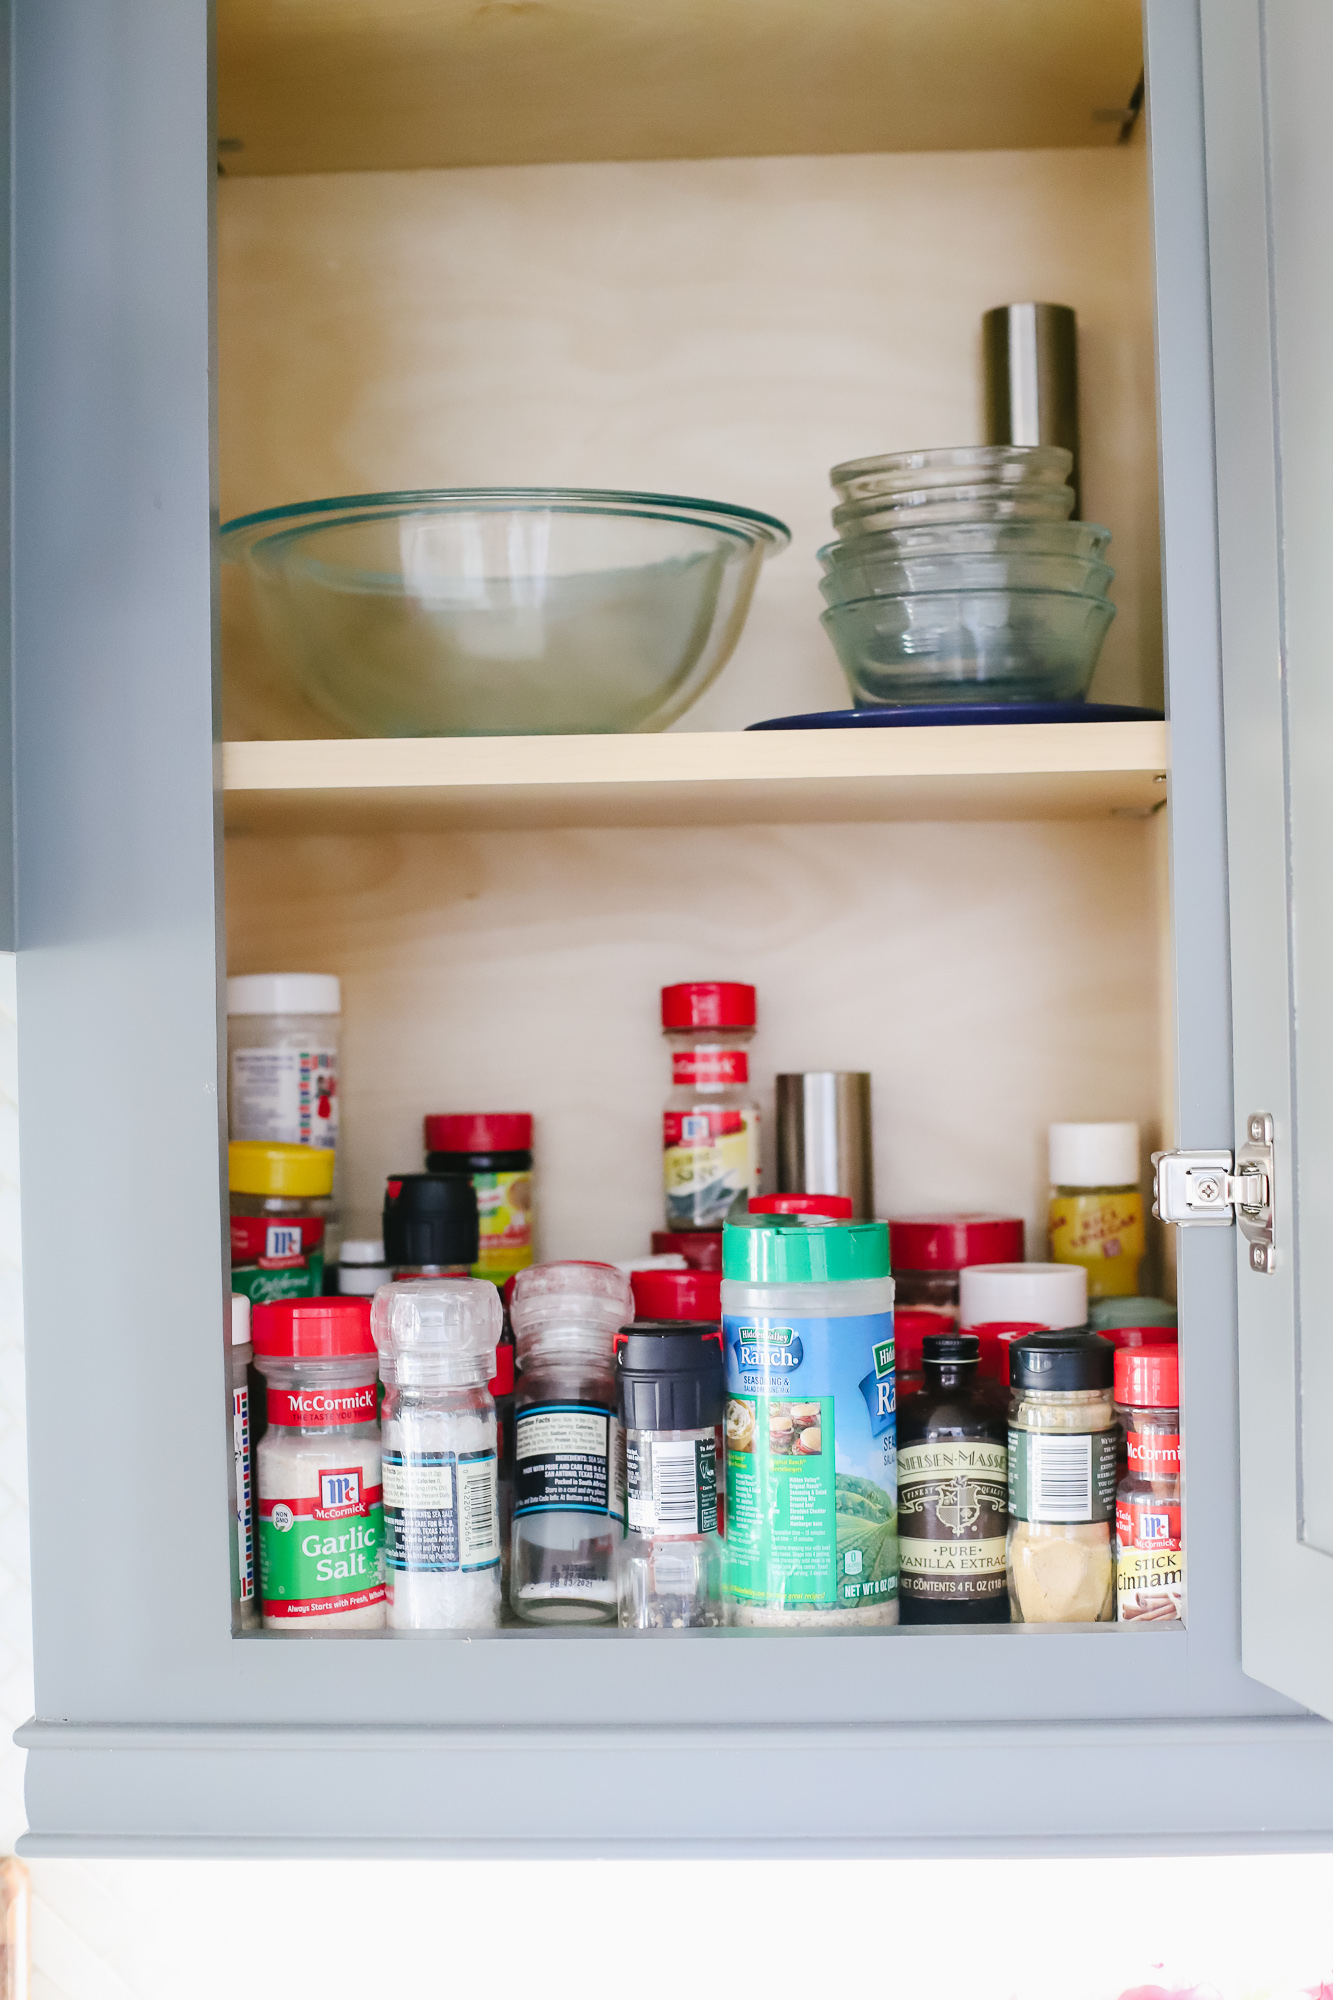 Want organized kitchen cabinets? Shelf Genie can help you clear the clutter  and mess